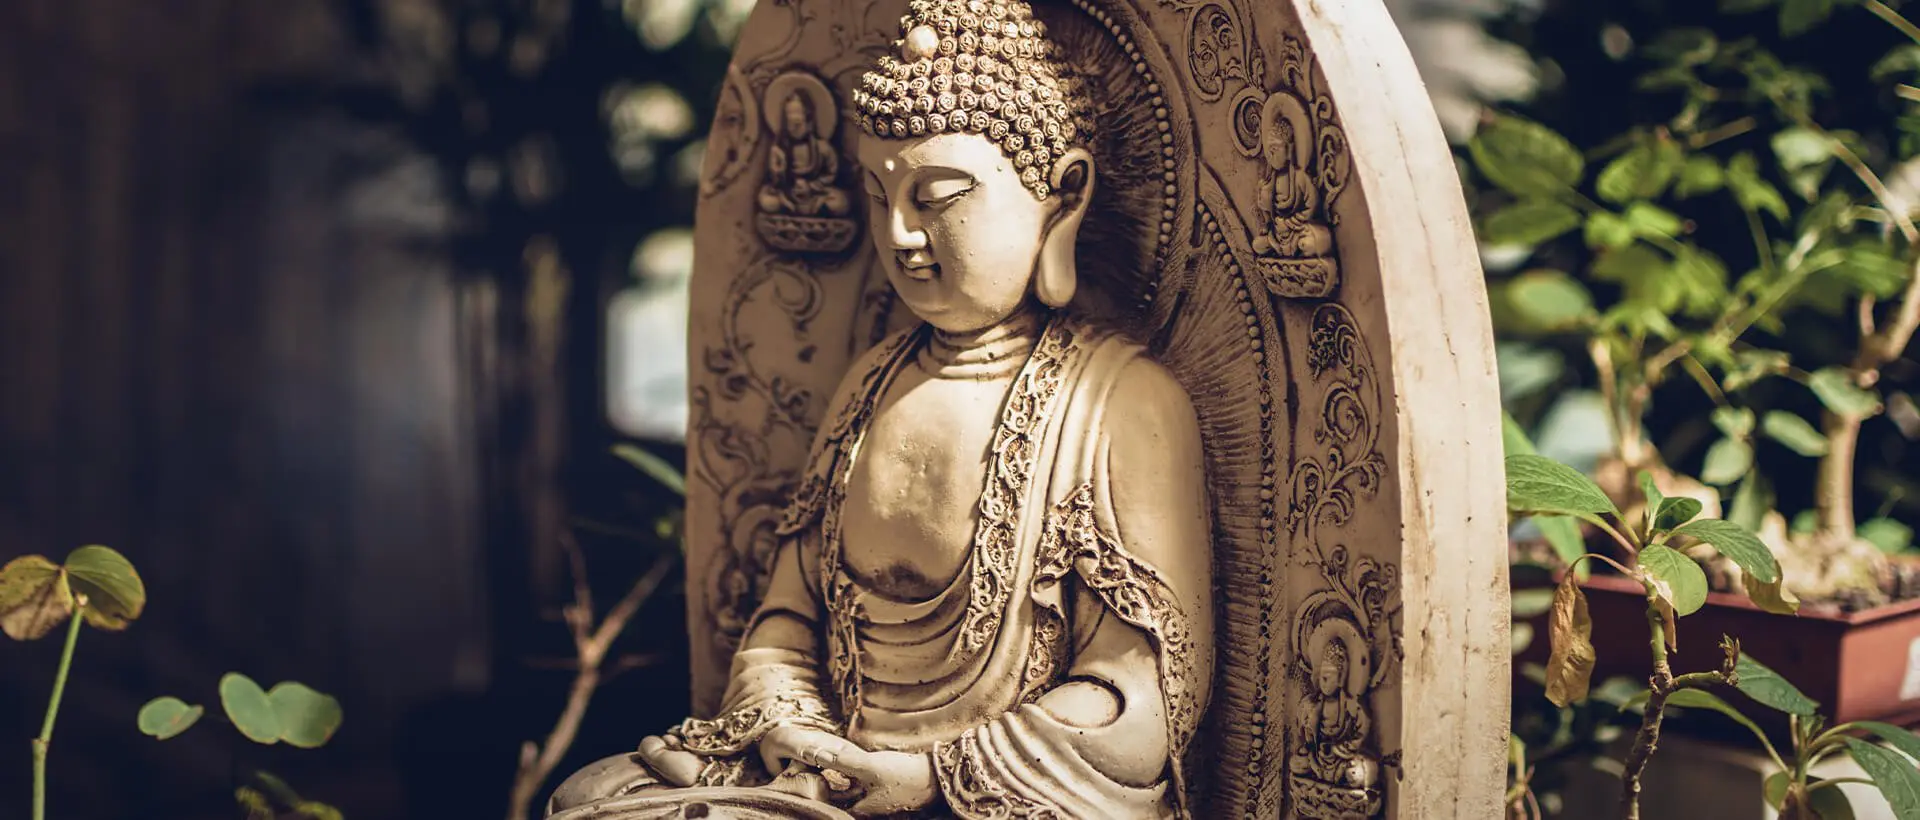 a statue of a buddha sitting in a garden.